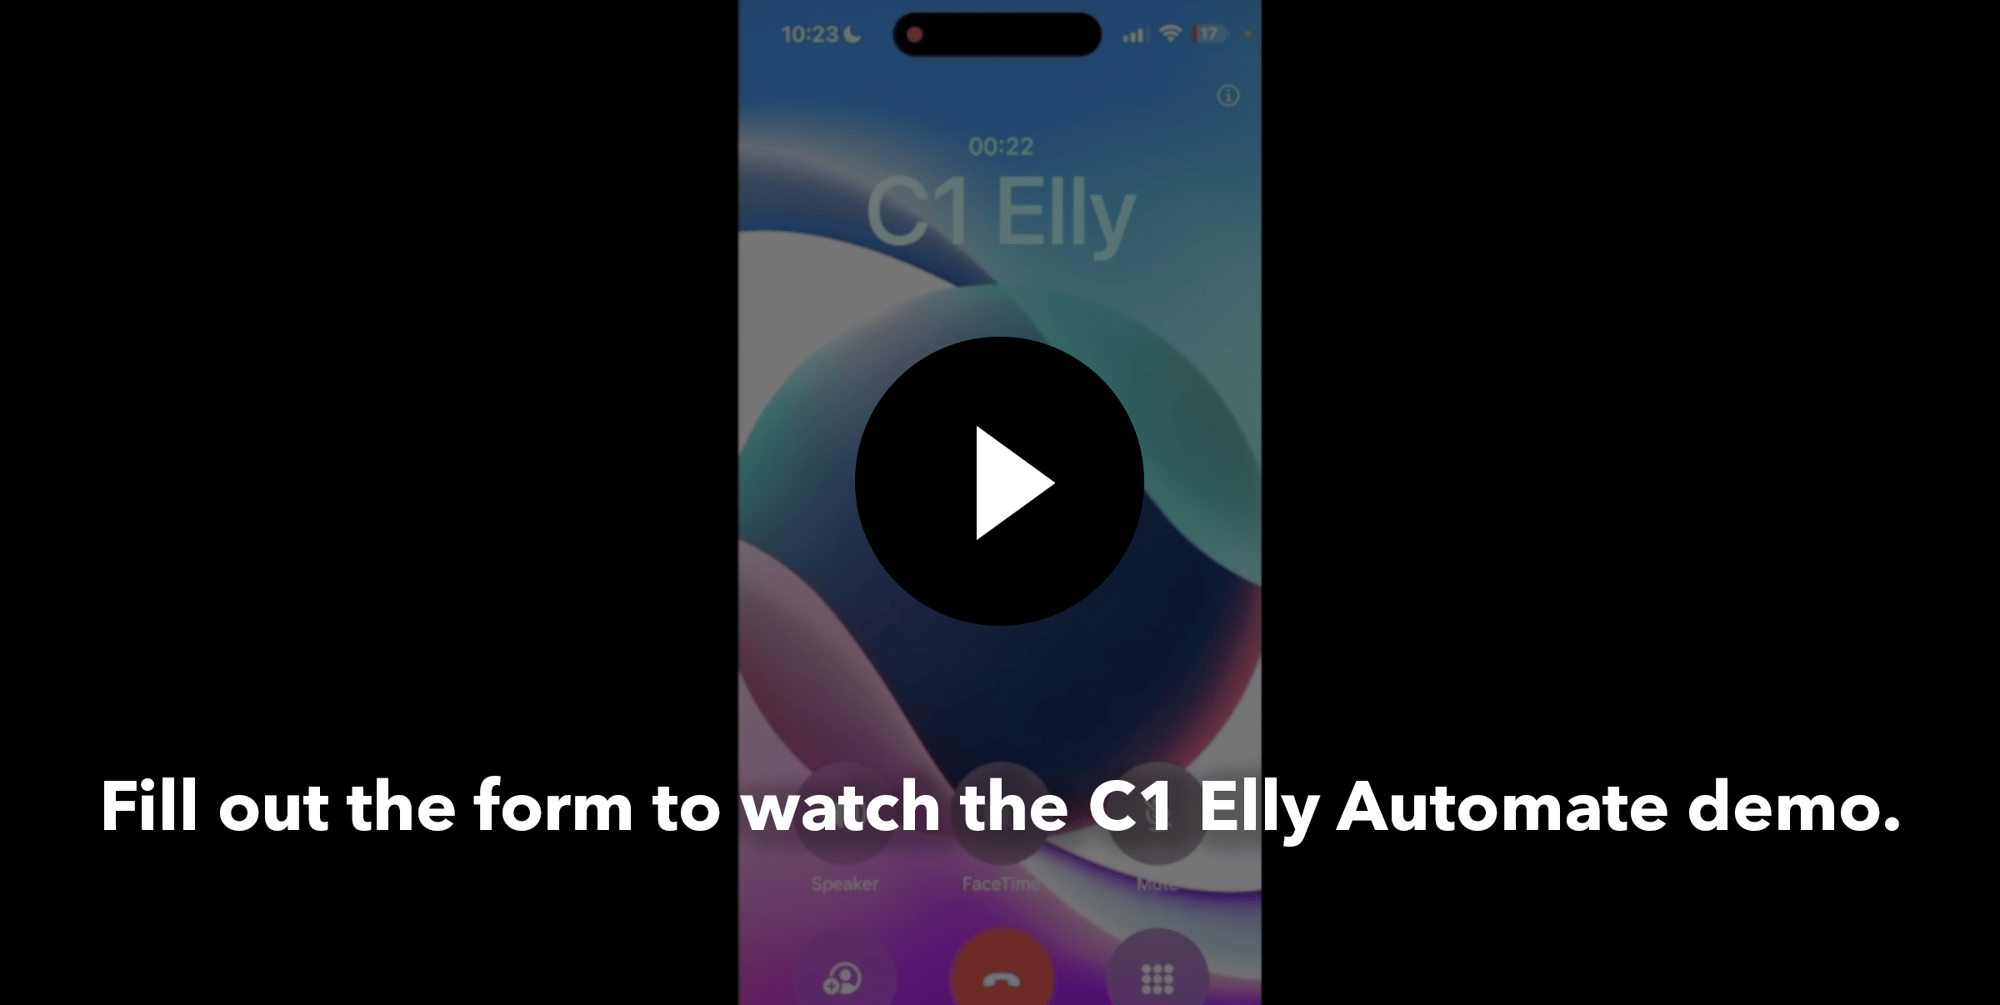 C1-Elly-Automate-Demo-Feature